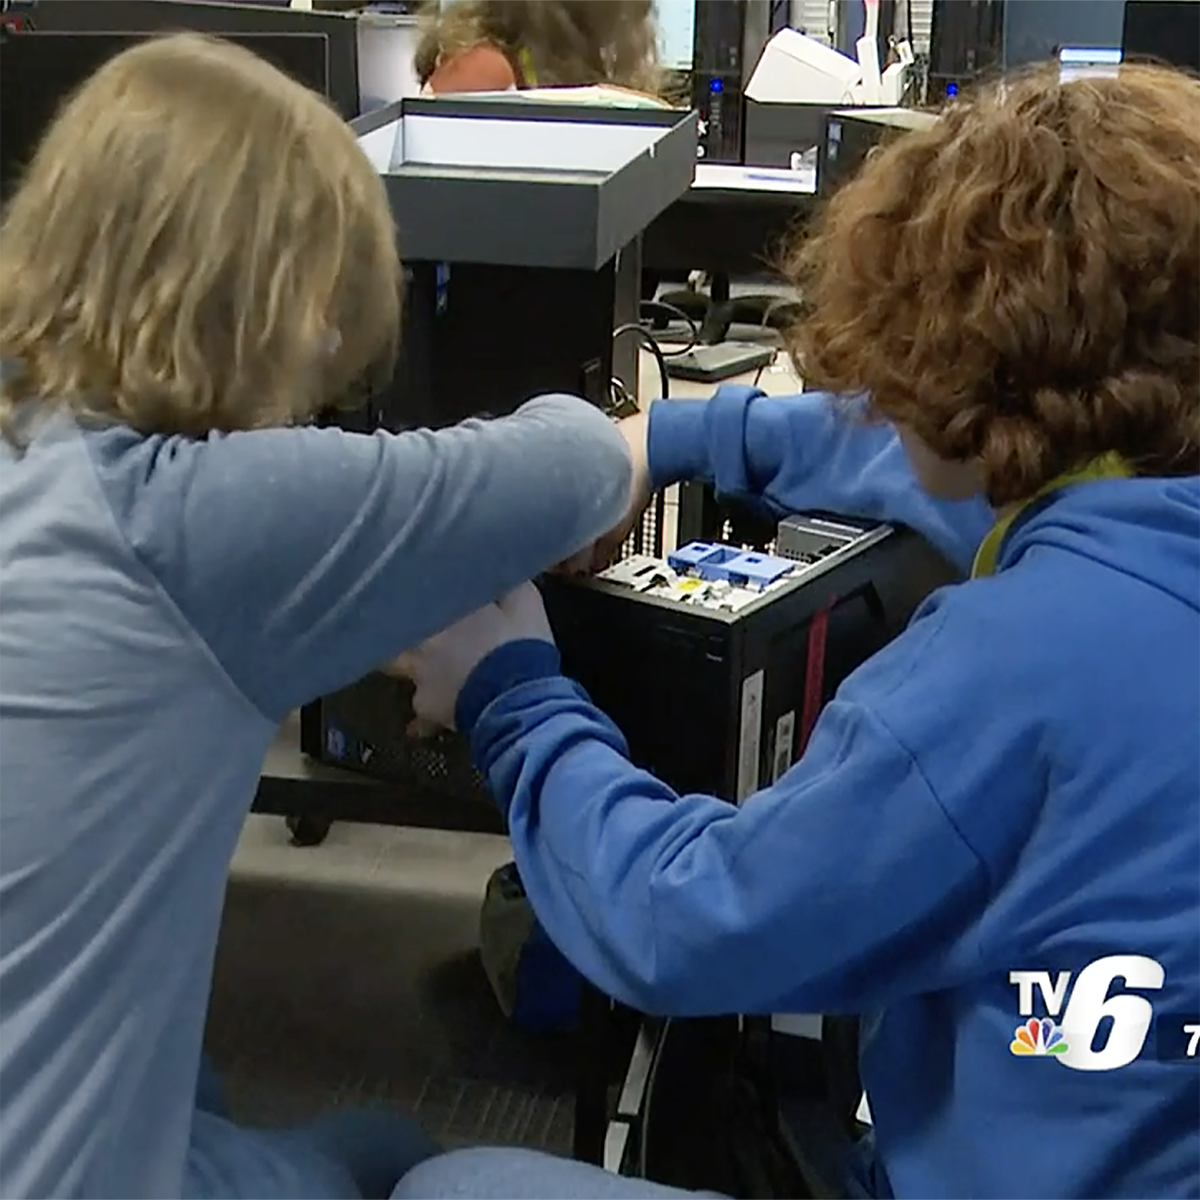 GenCyber Youth Camp Featured in TV6 News Story Computing News Blog